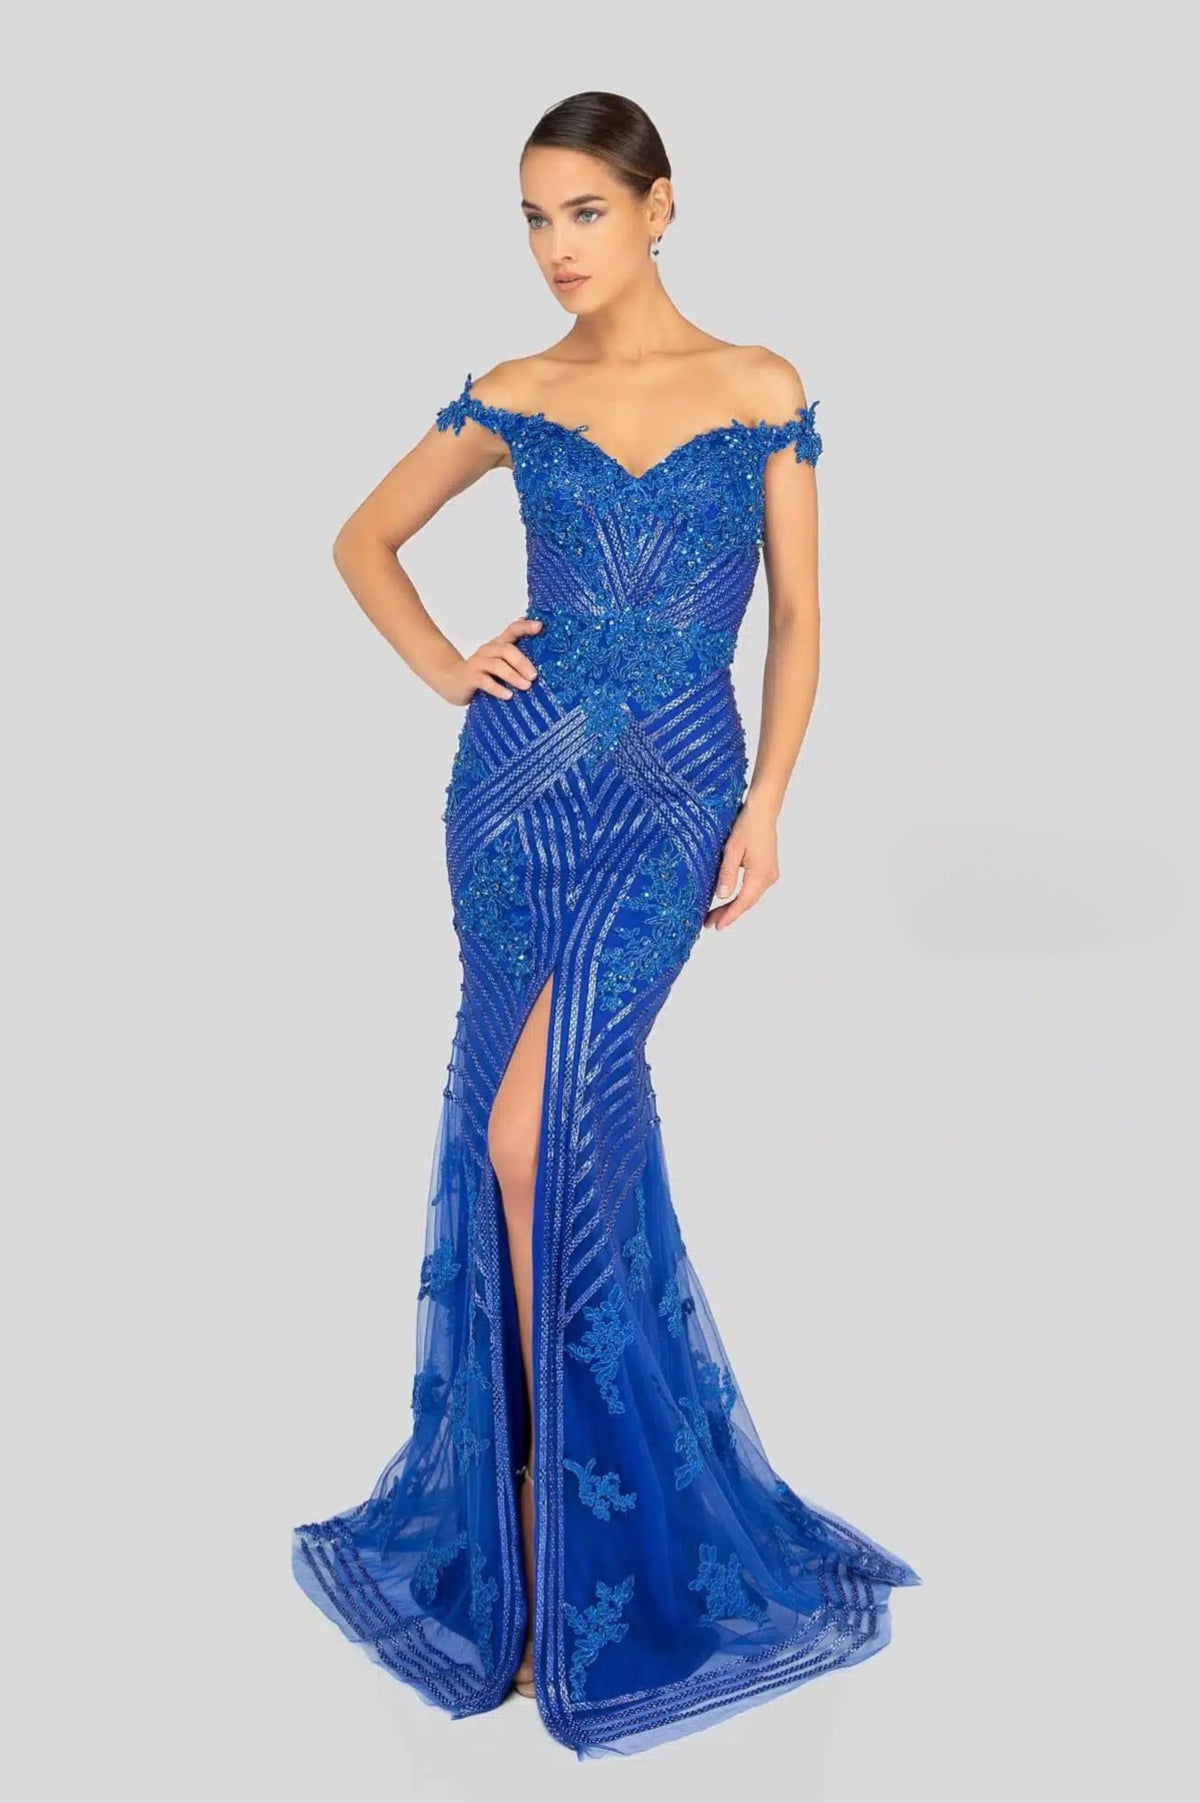 Elegant Terani Couture Evening Gown with Metallic Beaded Lace Appliqués | Perfect for Evening Events and Mother of the Bride/Groom | Madeline's Boutique - Toronto and Boca Raton, Florida Locations.  Model is wearing royal.